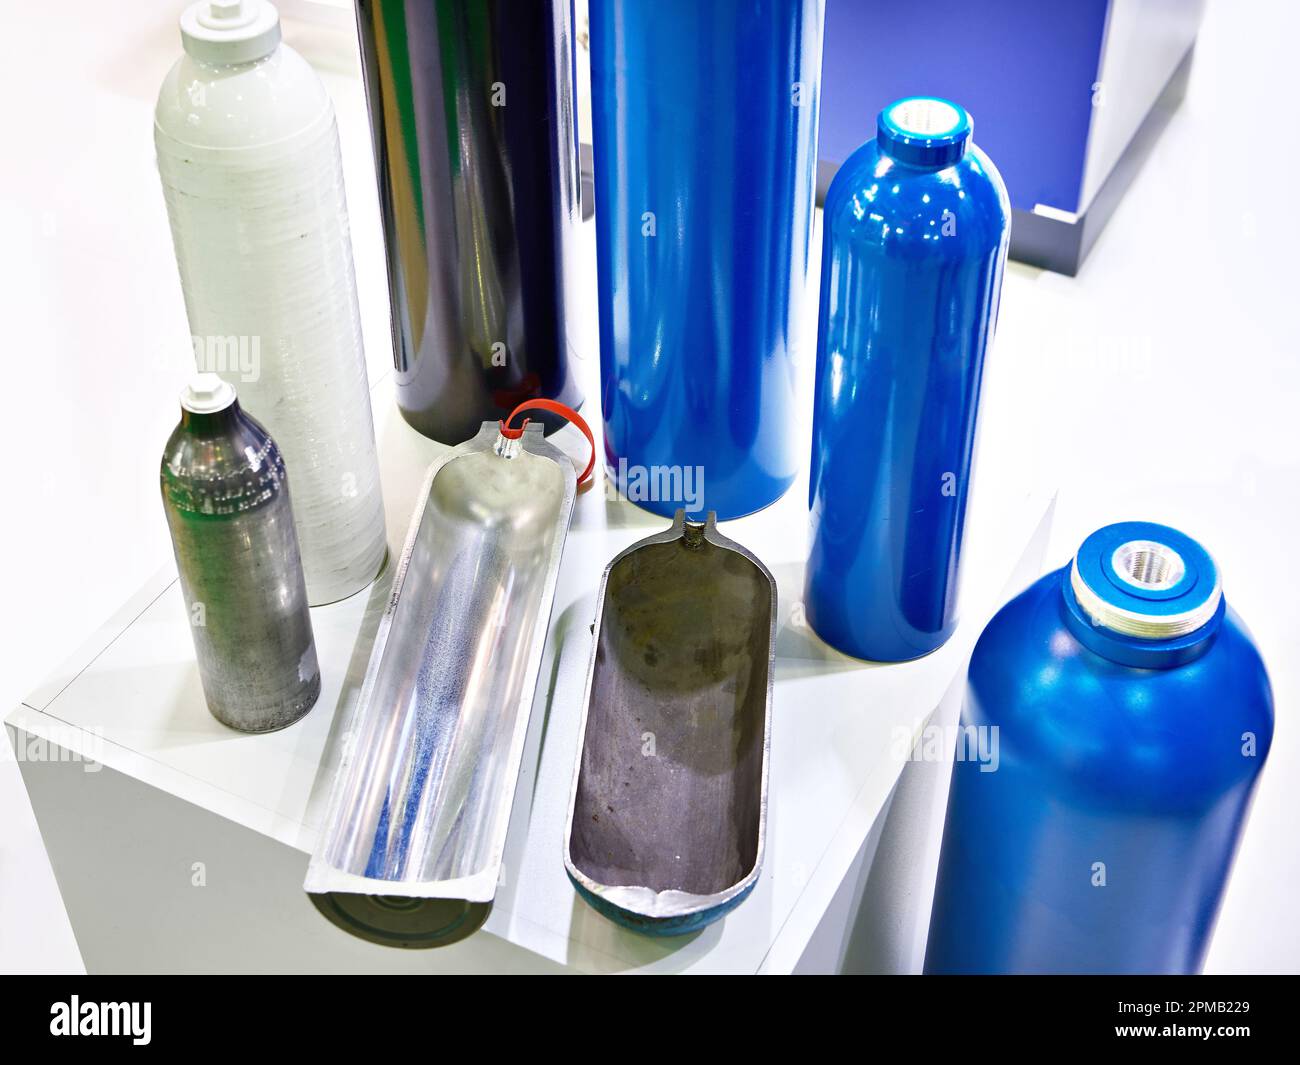 Medical oxygen cylinders on exhibition Stock Photo